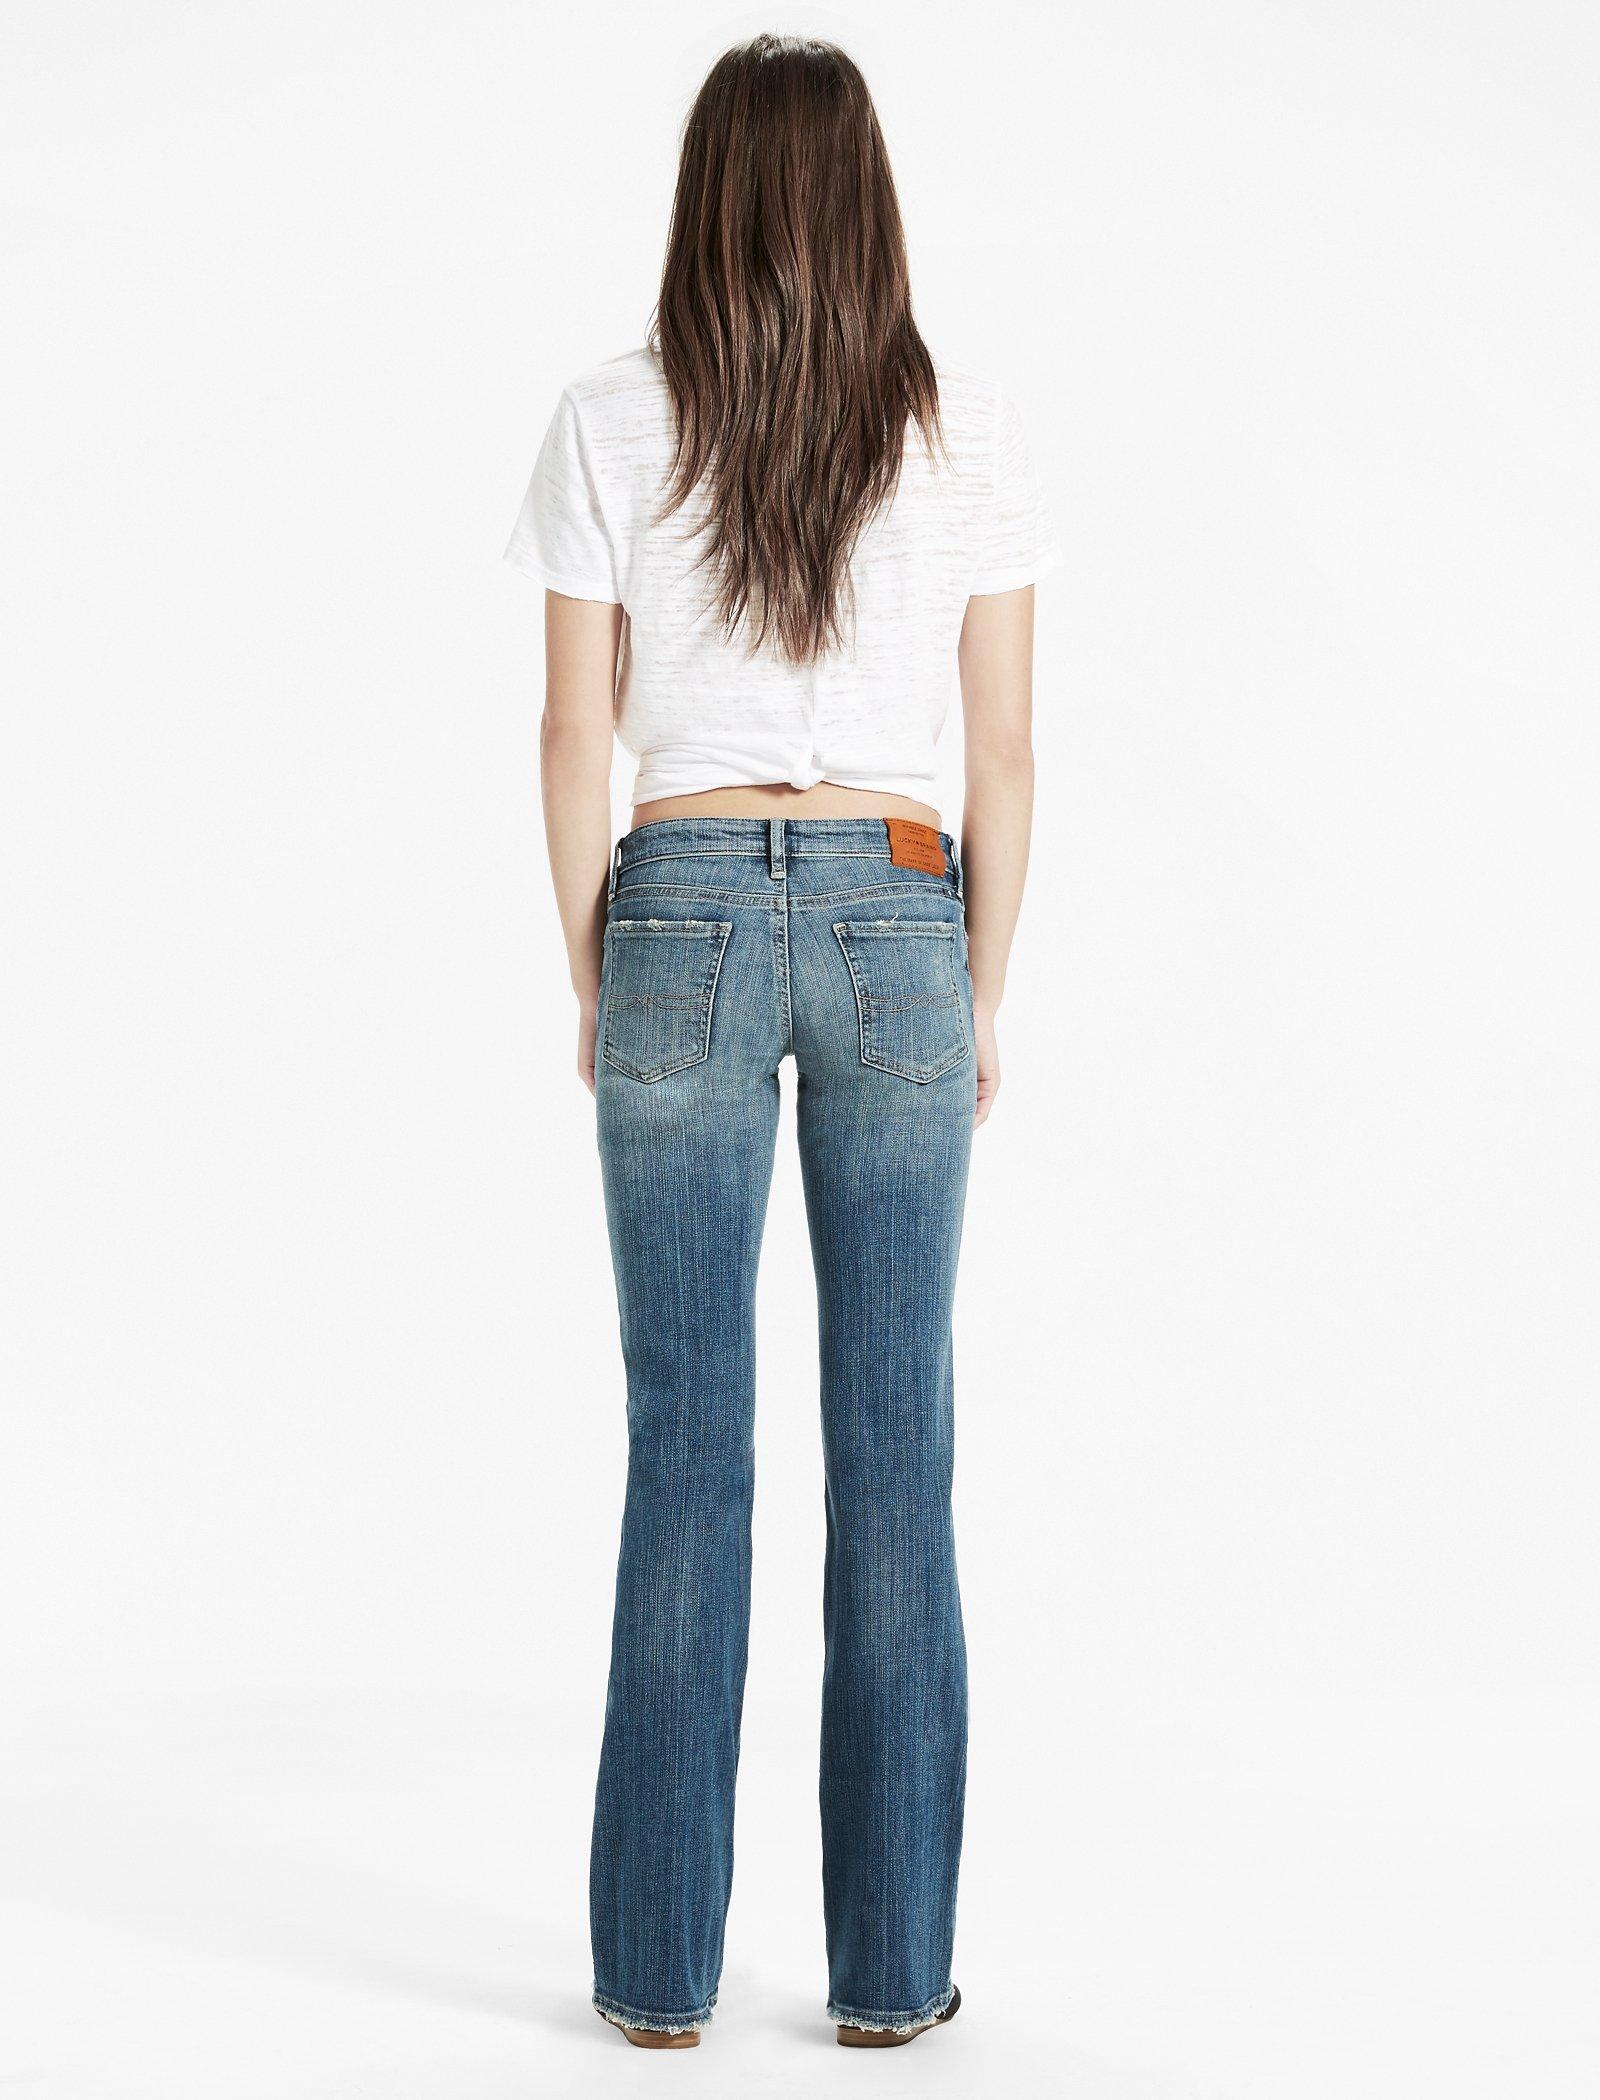 lil maggie lucky jeans